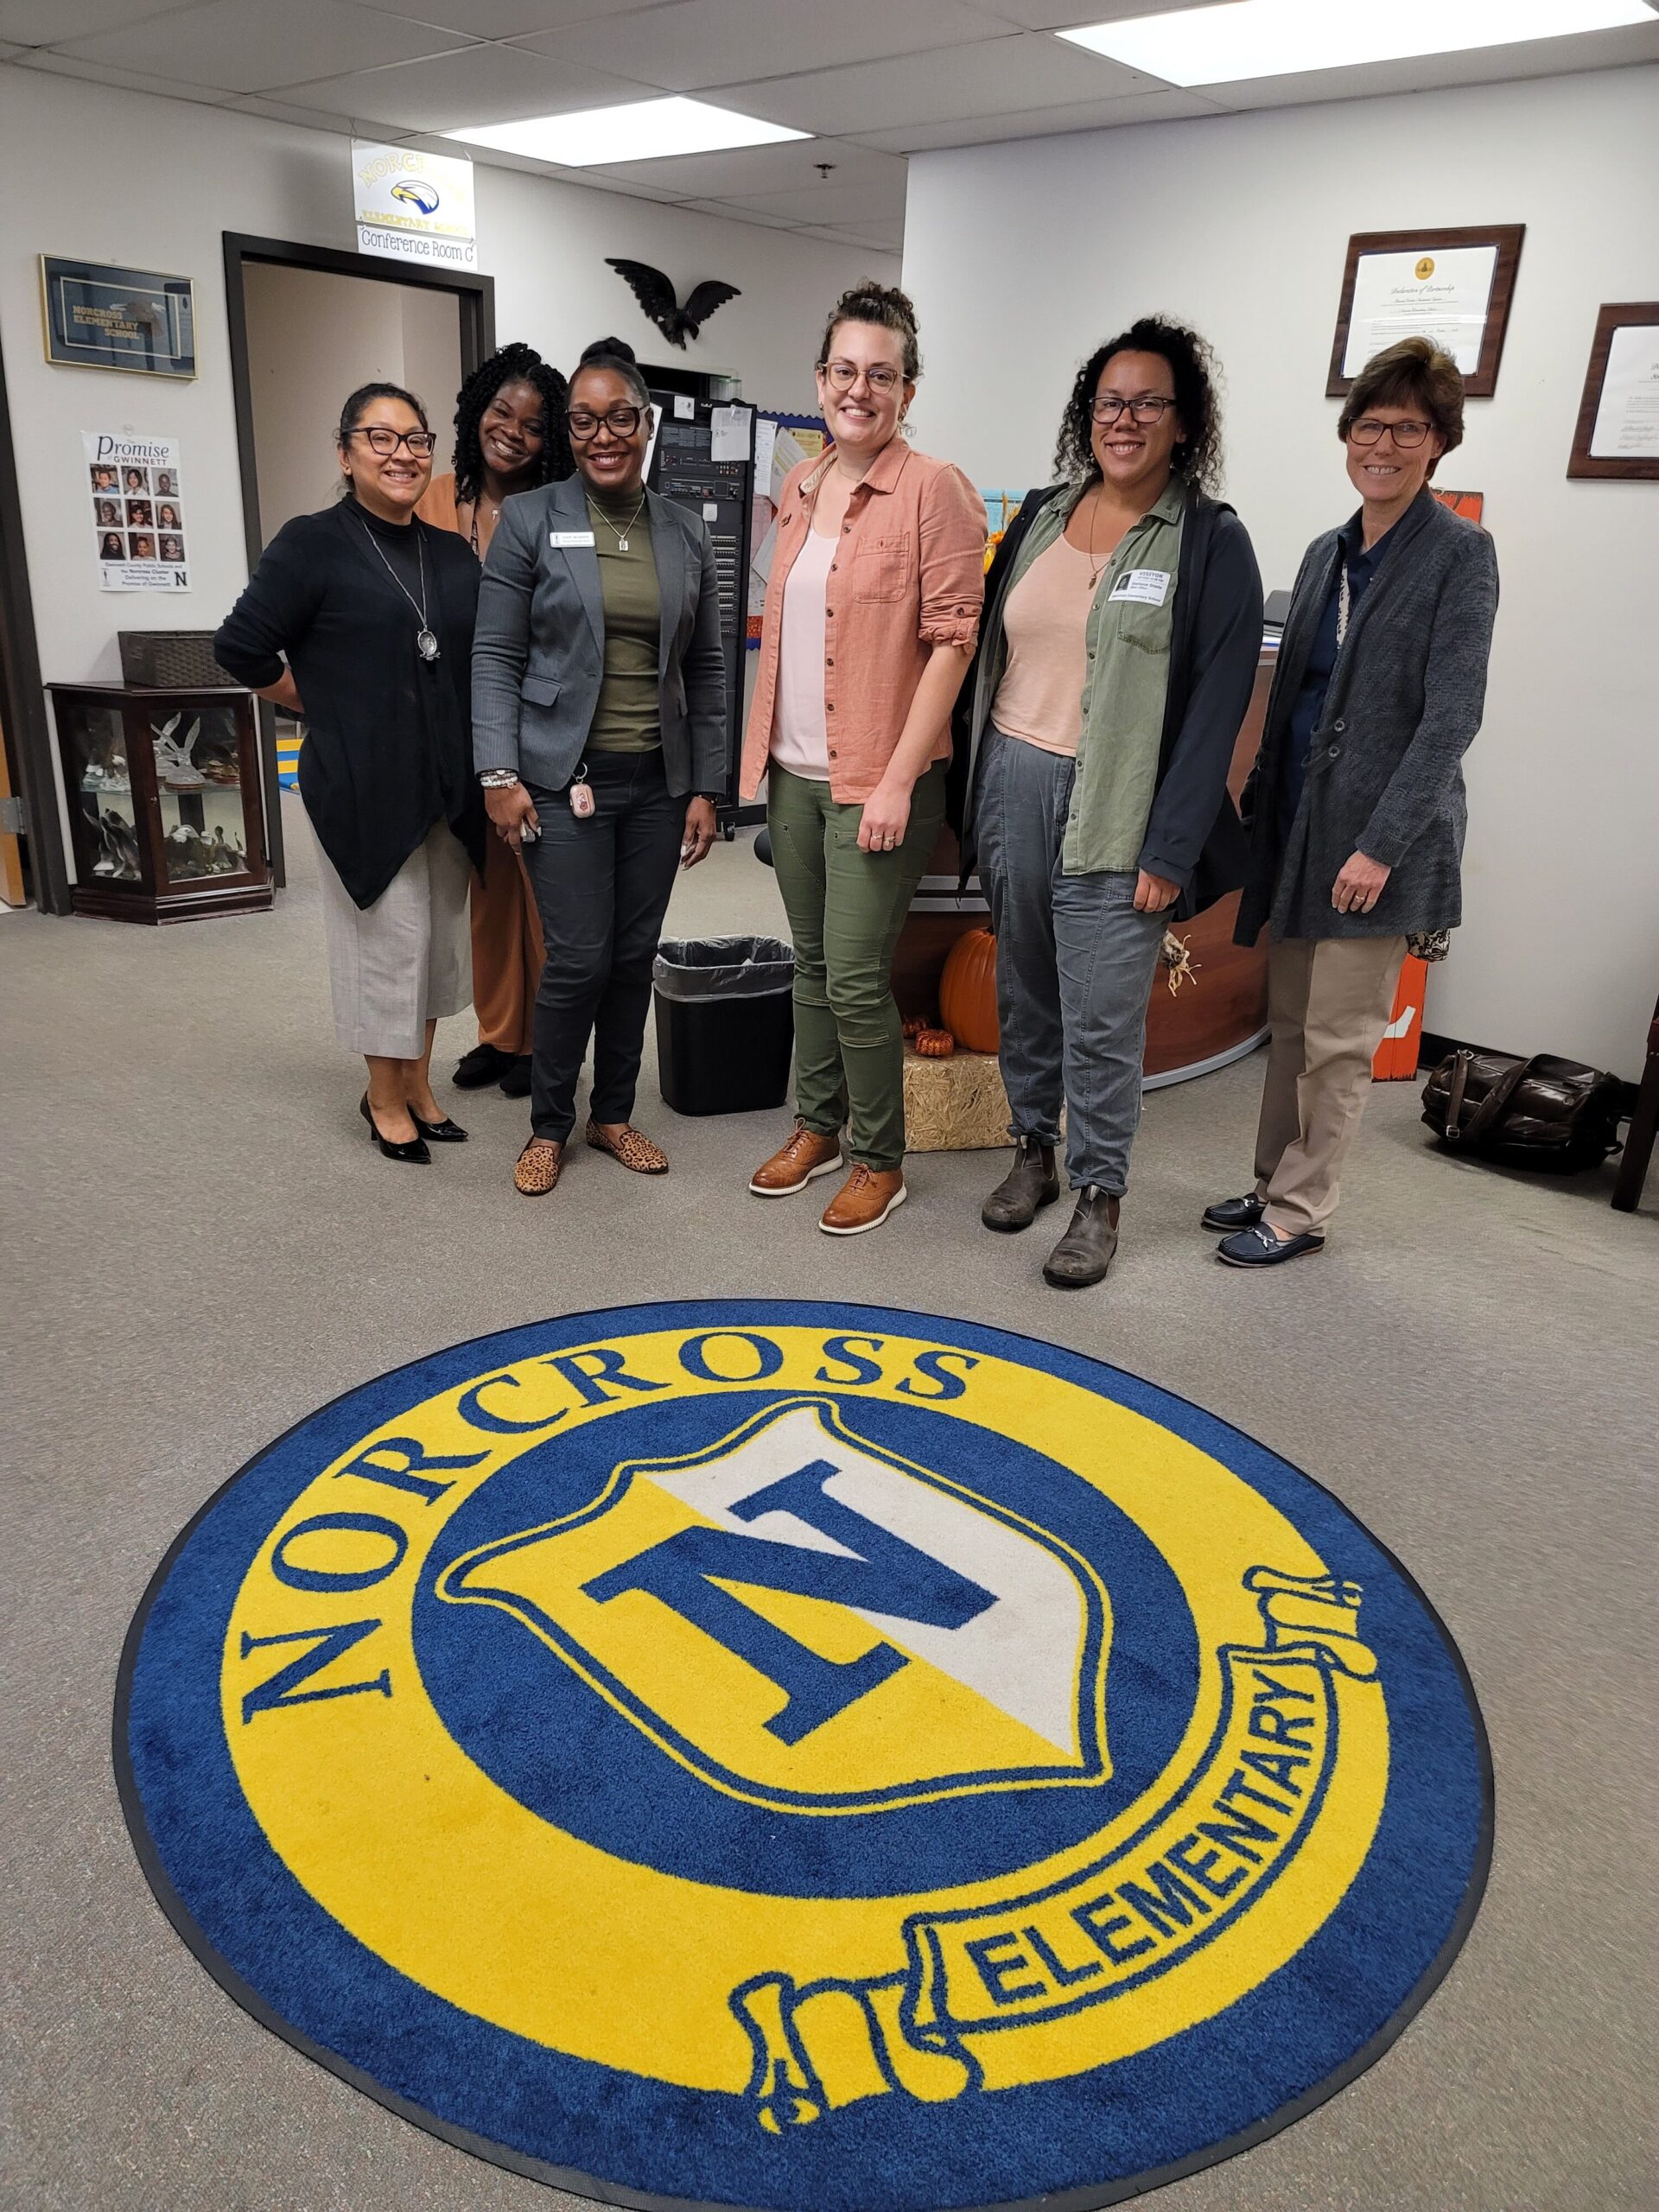 Six people stand in an office setting in front of a yellow and blue emblem on the carpet in front of them, which reads "Norcross Elementary".